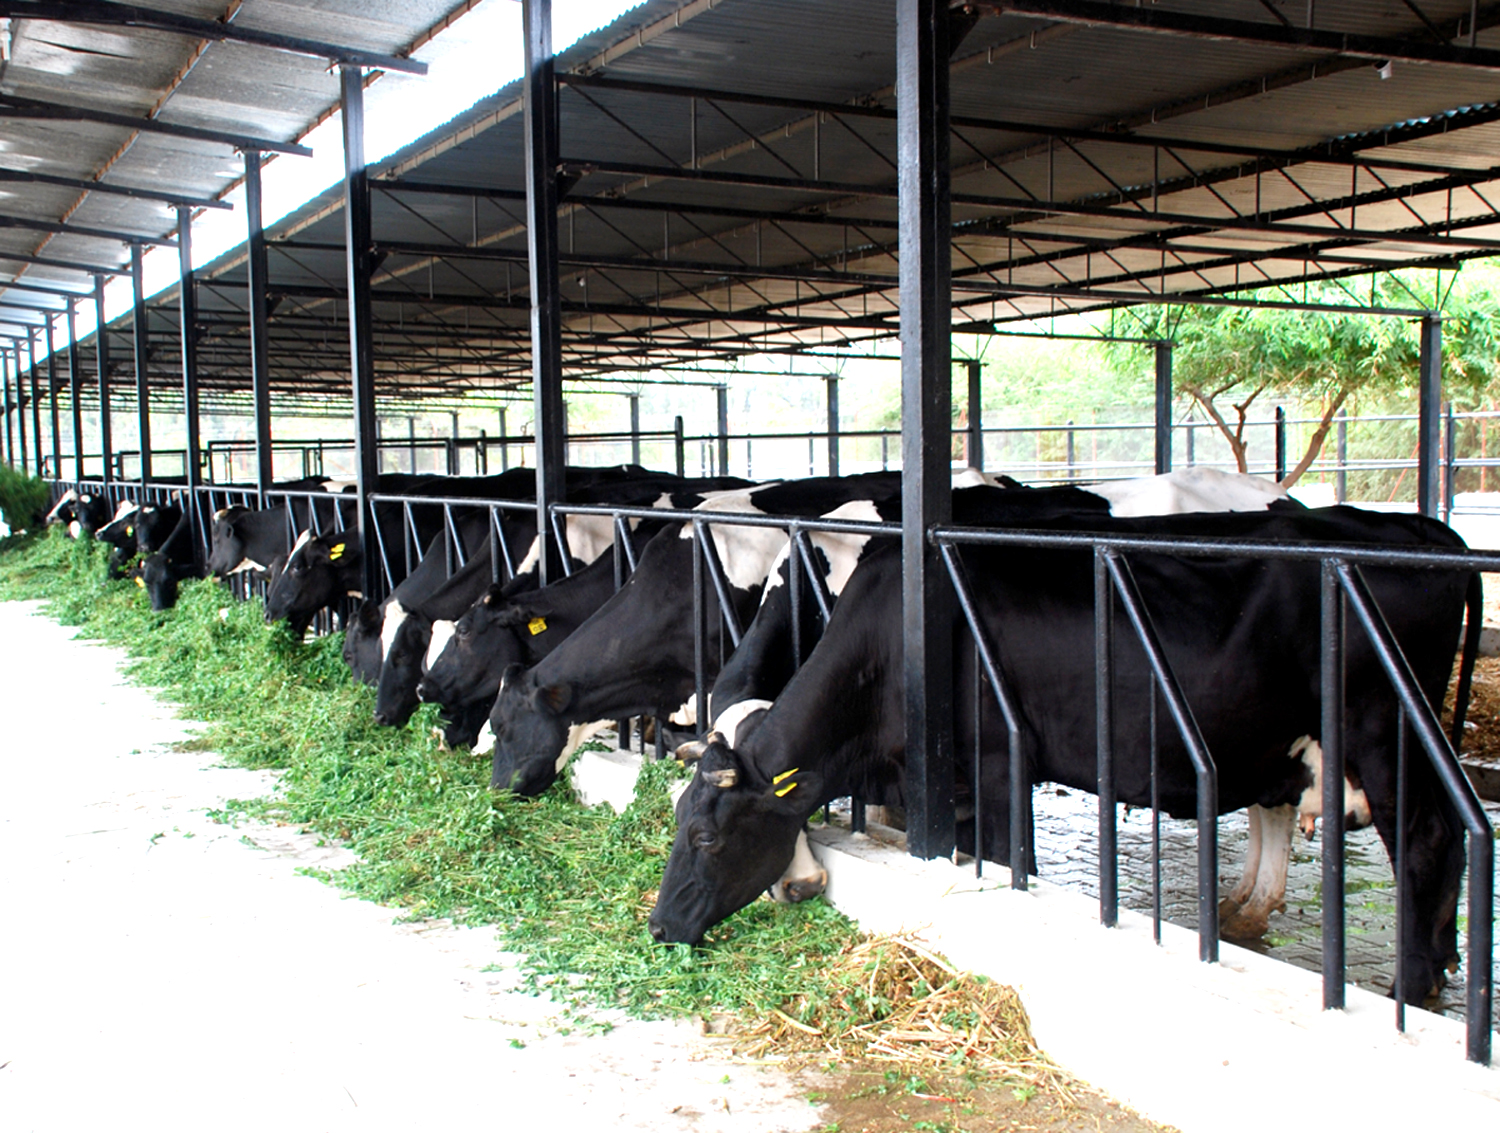 Home � Unlabelled � Dairy Farming in India